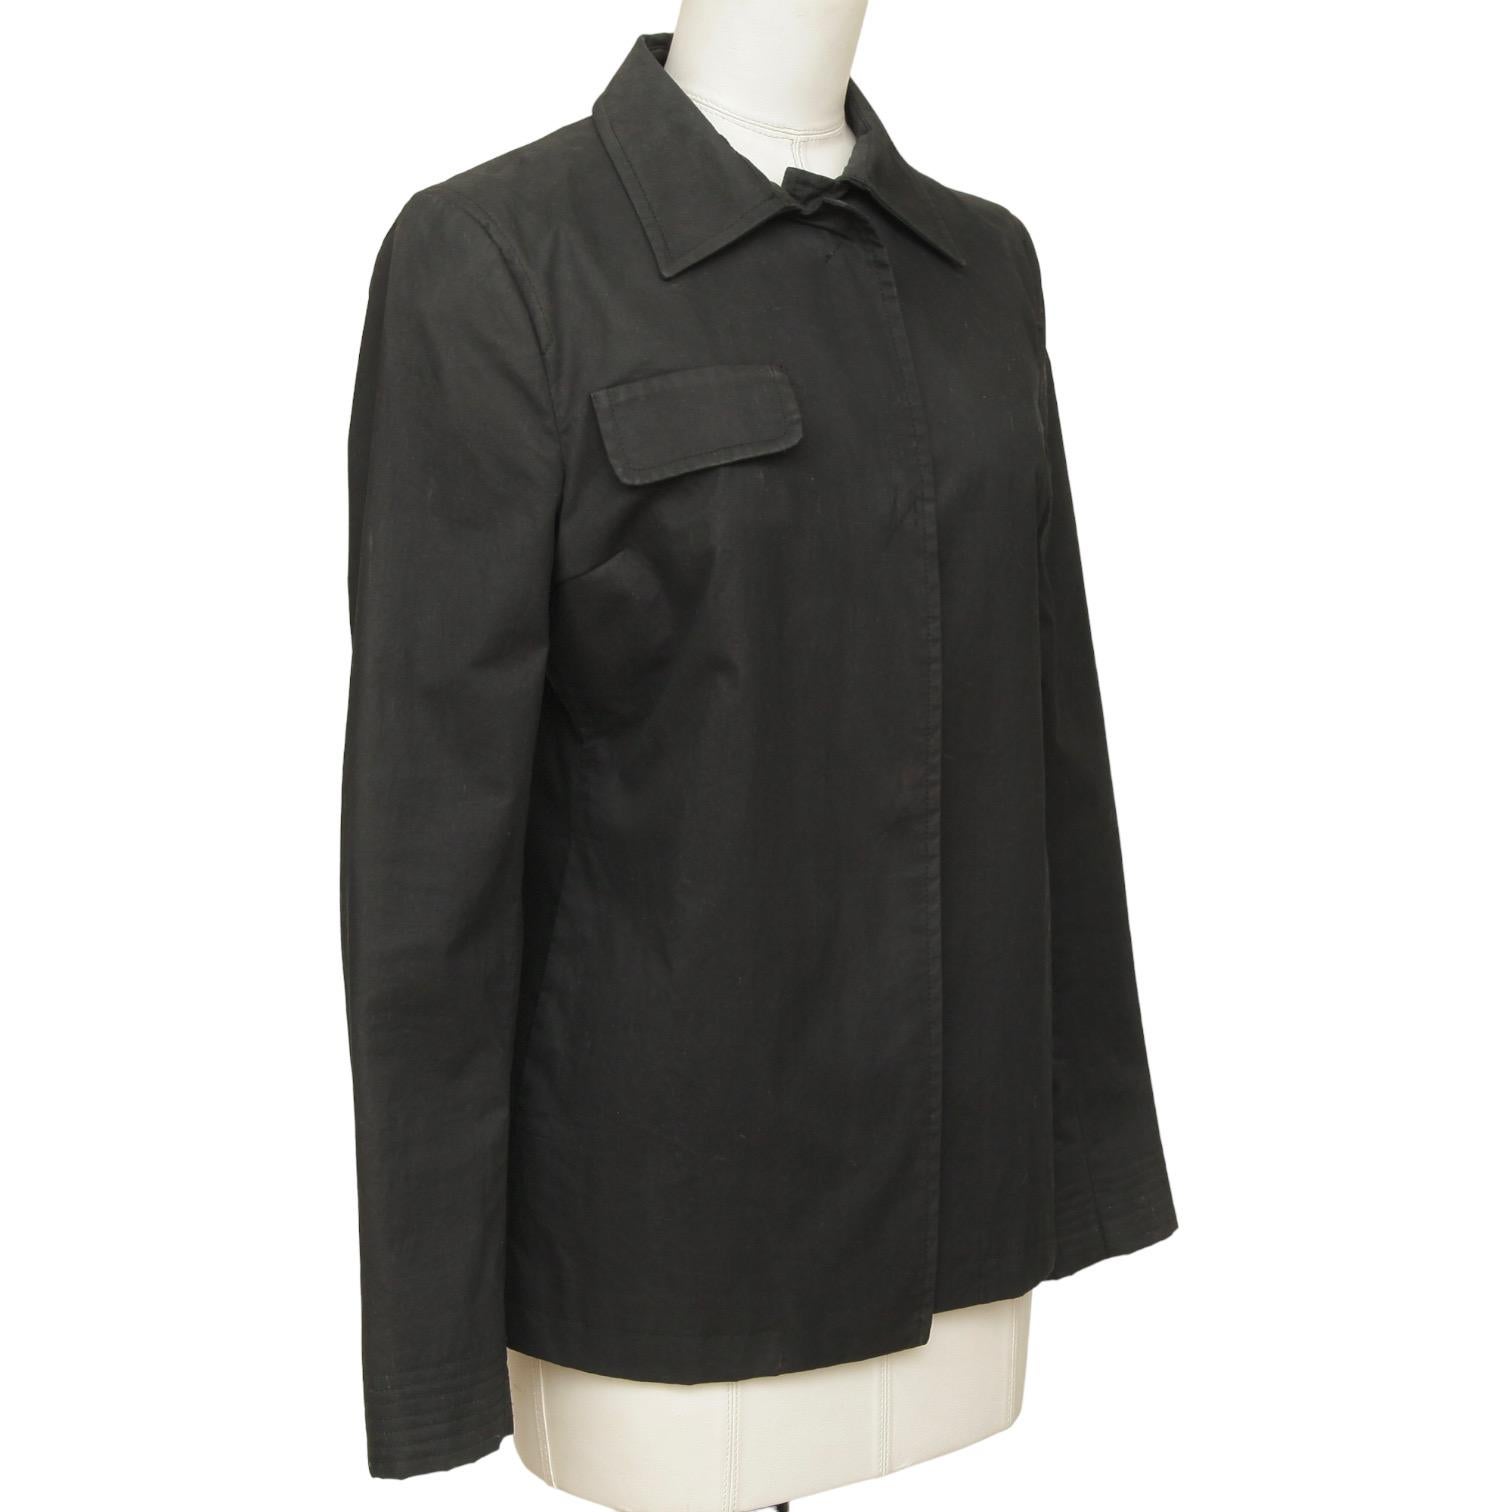 GUARANTEED AUTHENTIC VINTAGE COSTUME NATIONAL BLACK JACKET

Design:
- 3 covered button jacket.
- Black in color.
- Lapel.
- Long sleeve.
- Rear vent.
- Fully lined.
- Beautiful, nice year round weight!

Size: 40

Fabric: 90% Cotton, 10%